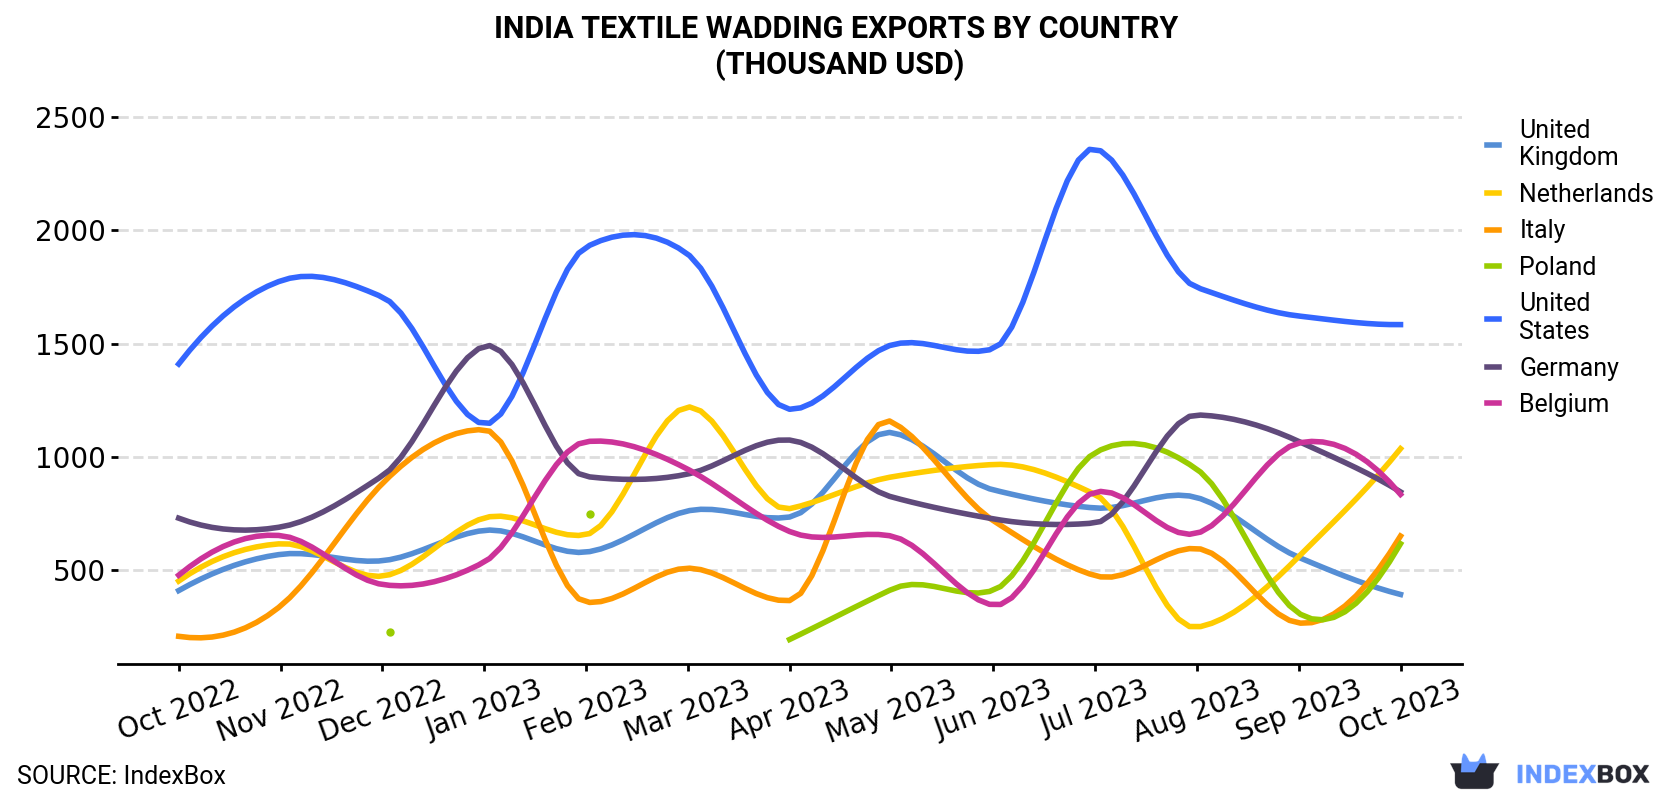 India Textile Wadding Exports By Country (Thousand USD)